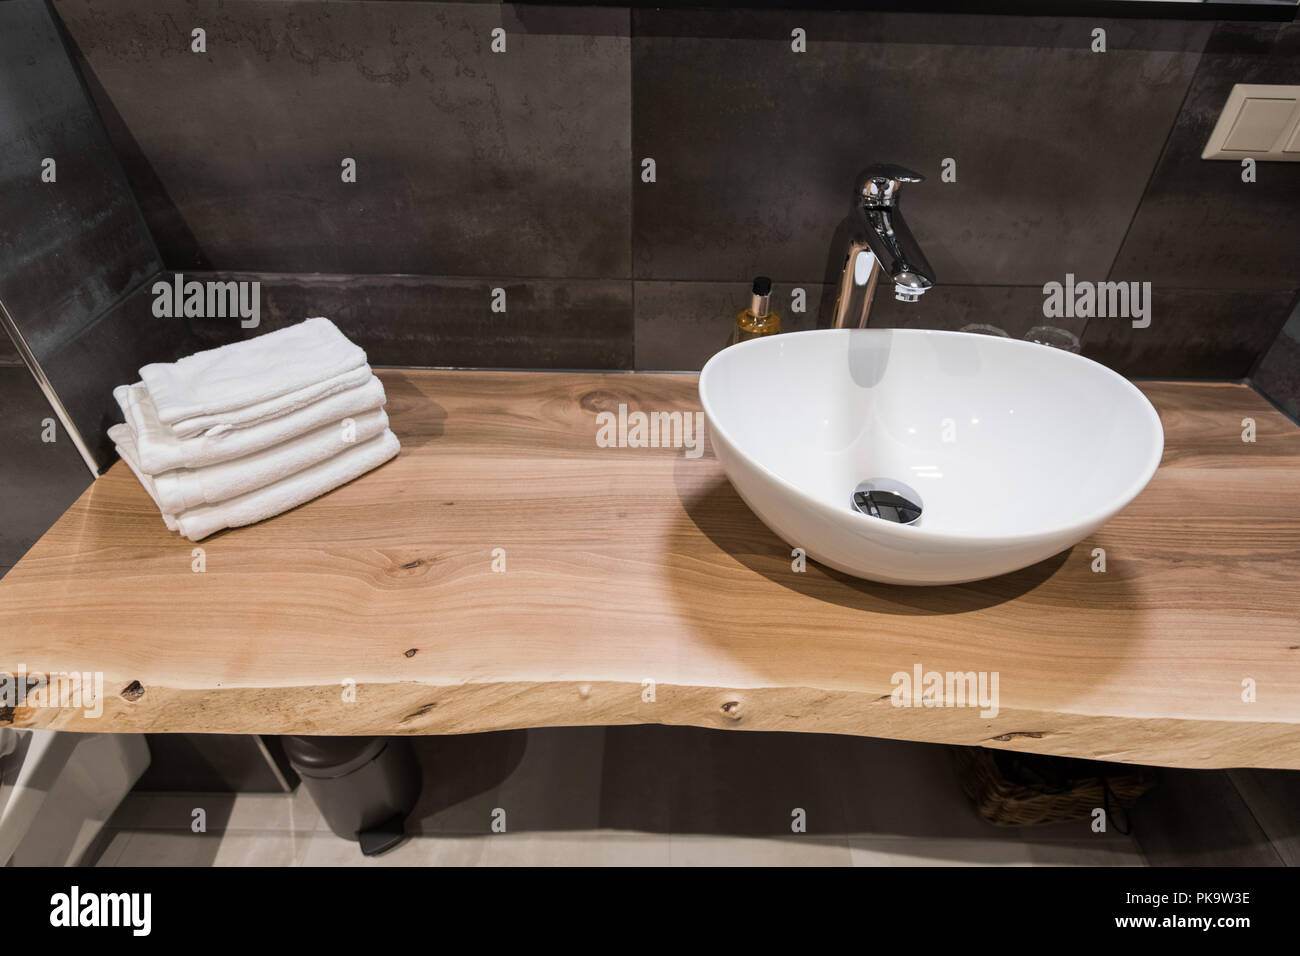 Modern Interior Of The Bathroom The Washbasin Is Made Of White